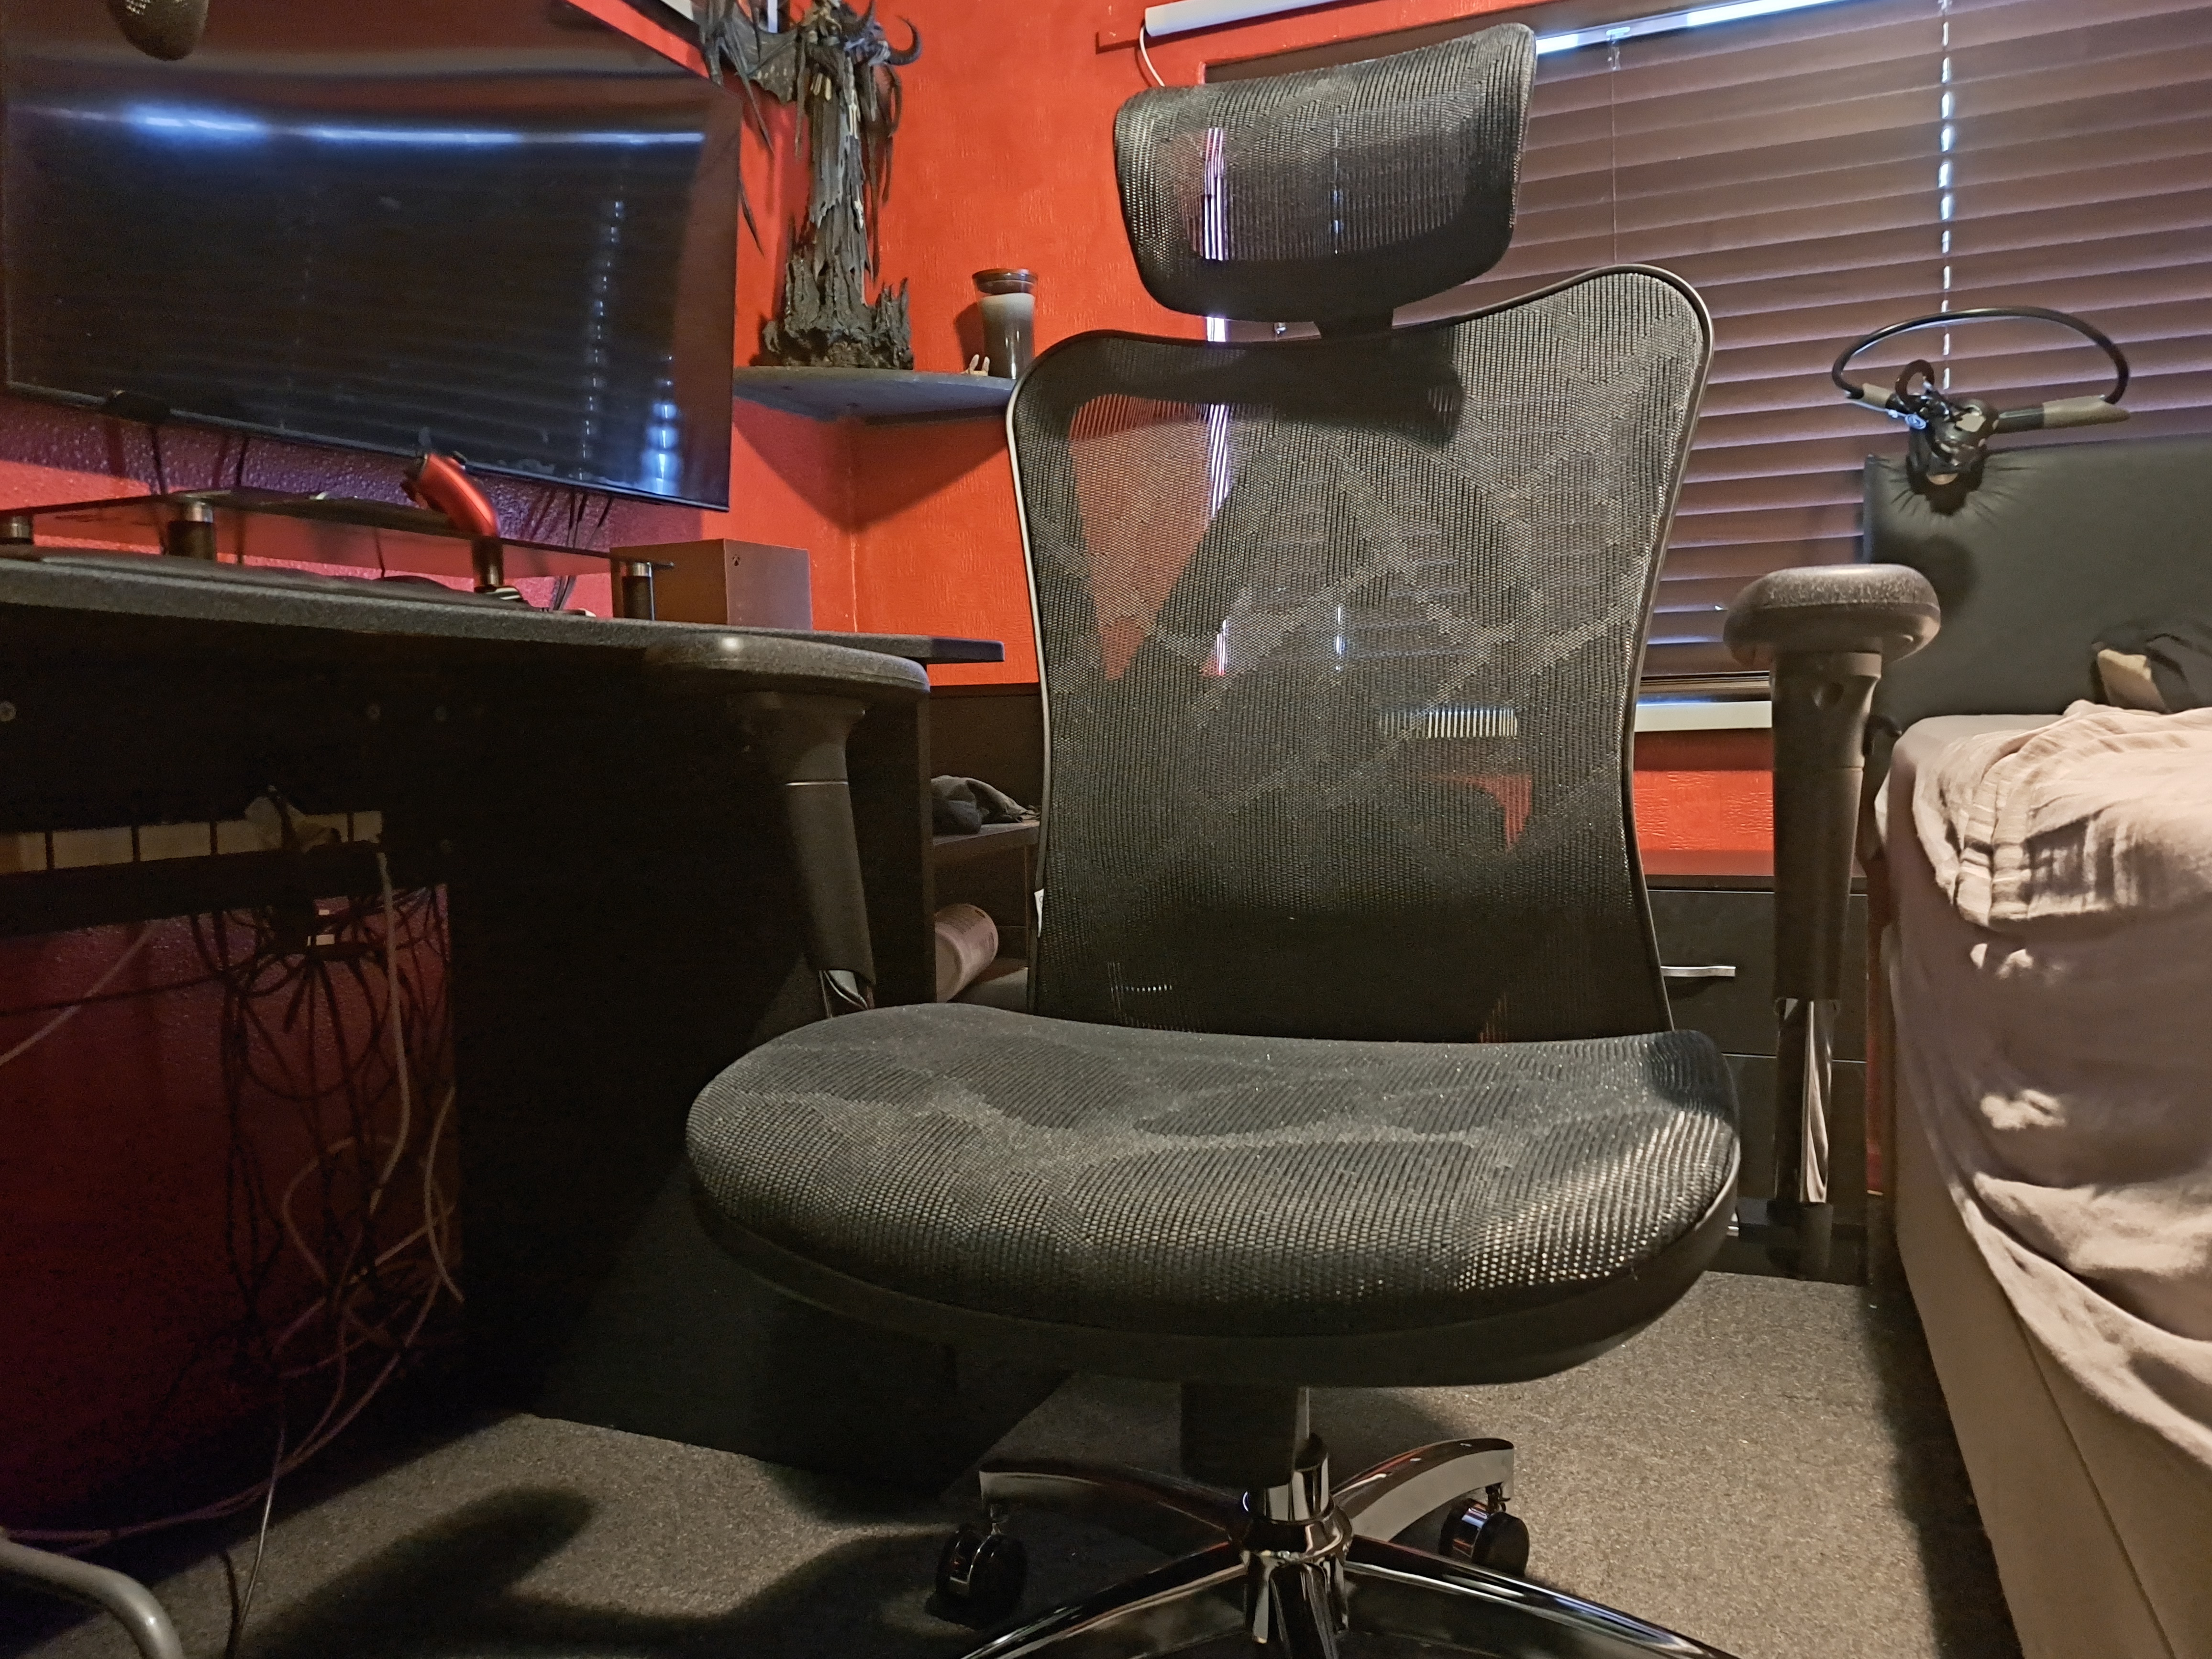 Sihoo M57 Office Chair Review: Comfort and Support That Won't Break the  Bank